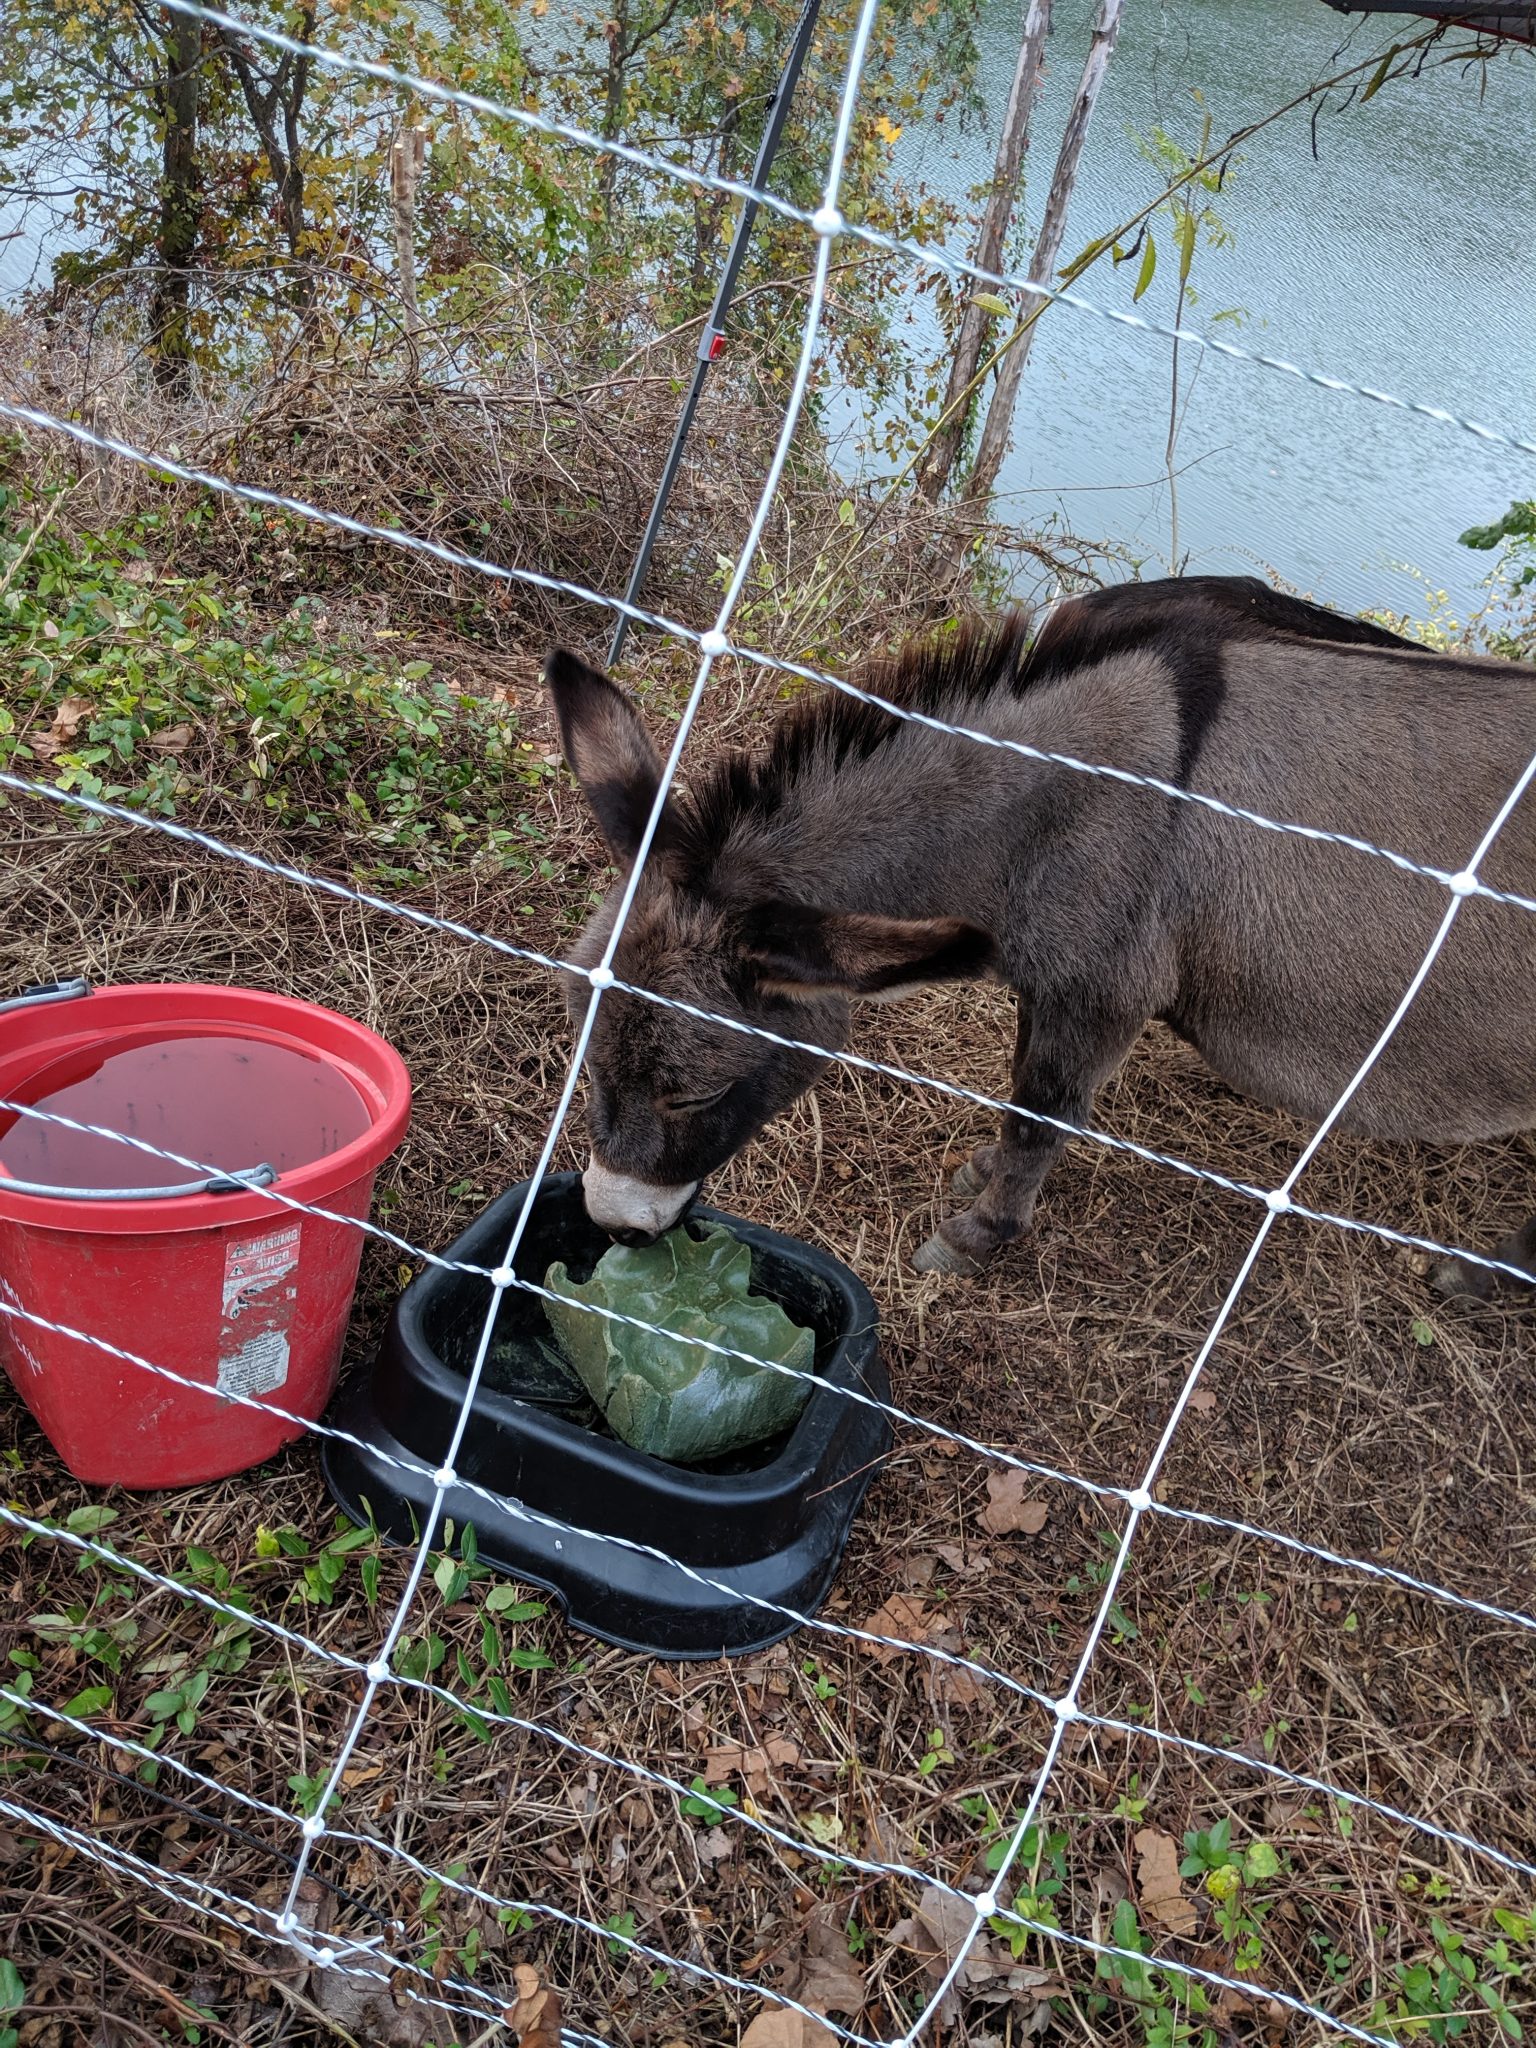 A donkey drinking some water